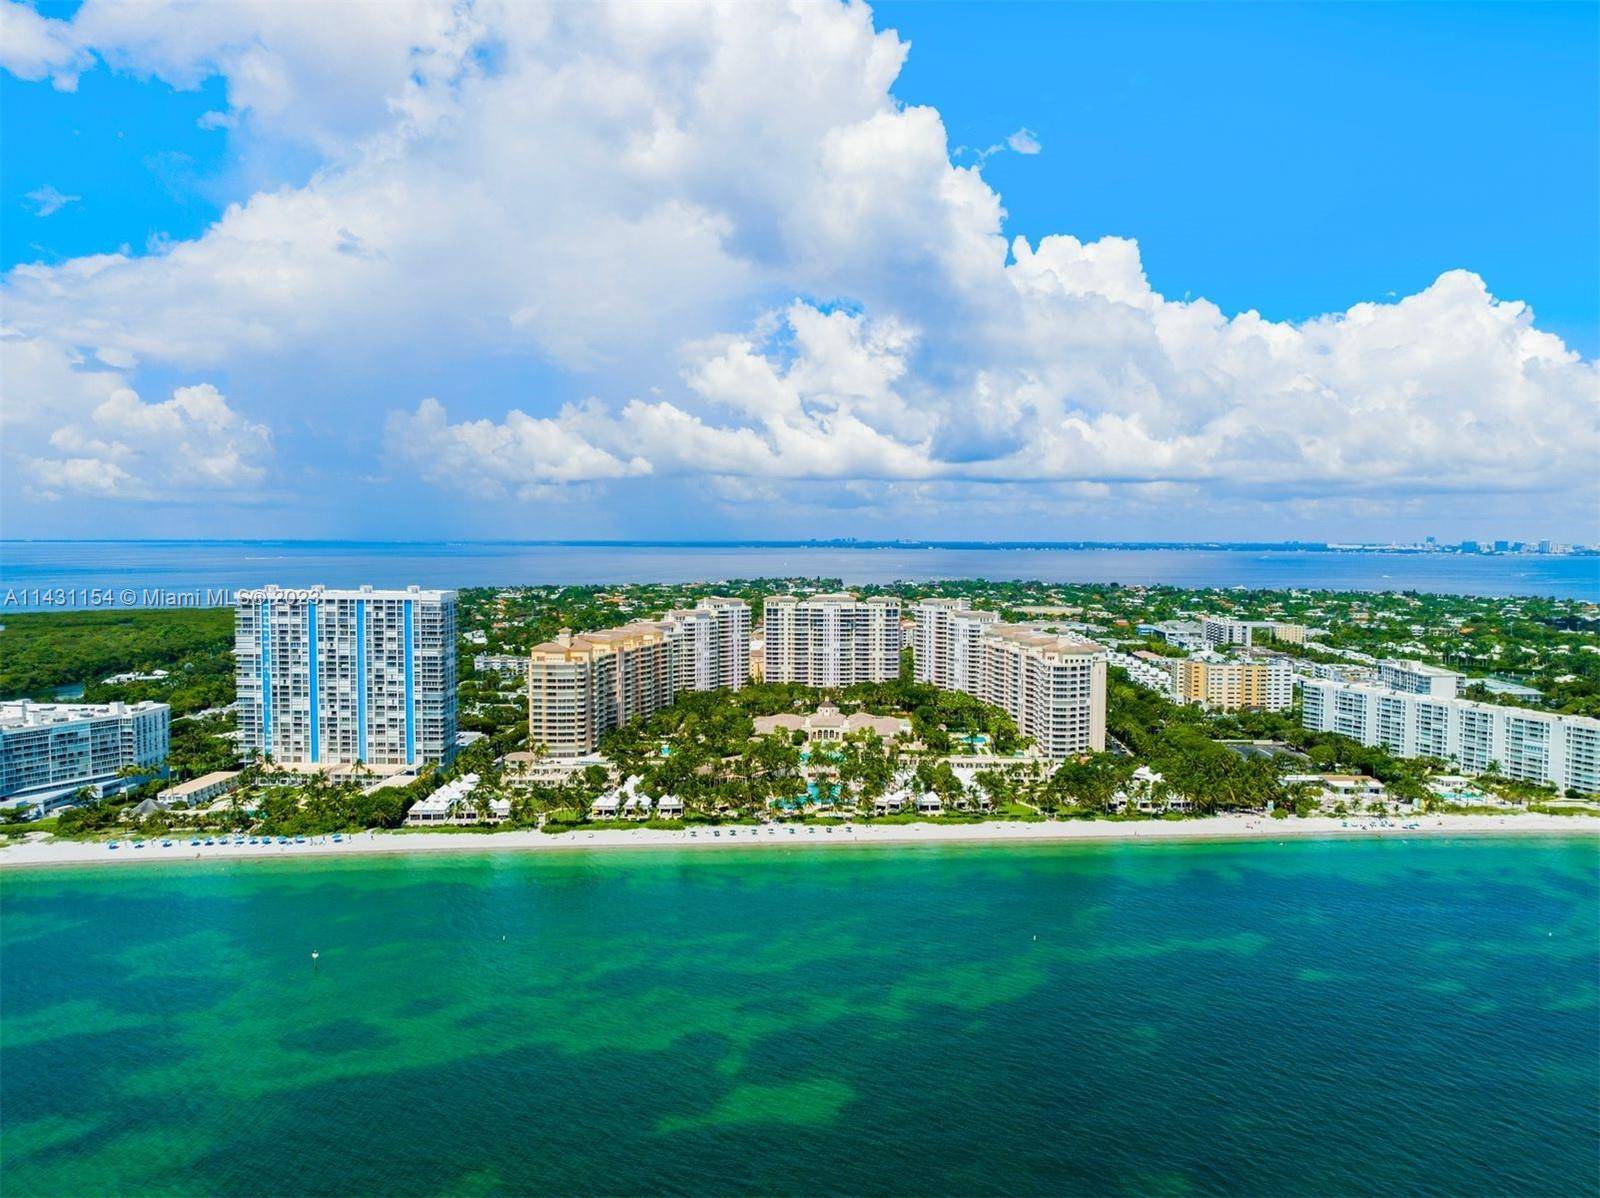 Luxury living in this exquisite Key Biscayne, Florida condominium with breathtaking see forever views stretching across the Atlantic Ocean, Biscayne Bay, and pristine beaches from the 15th floor.